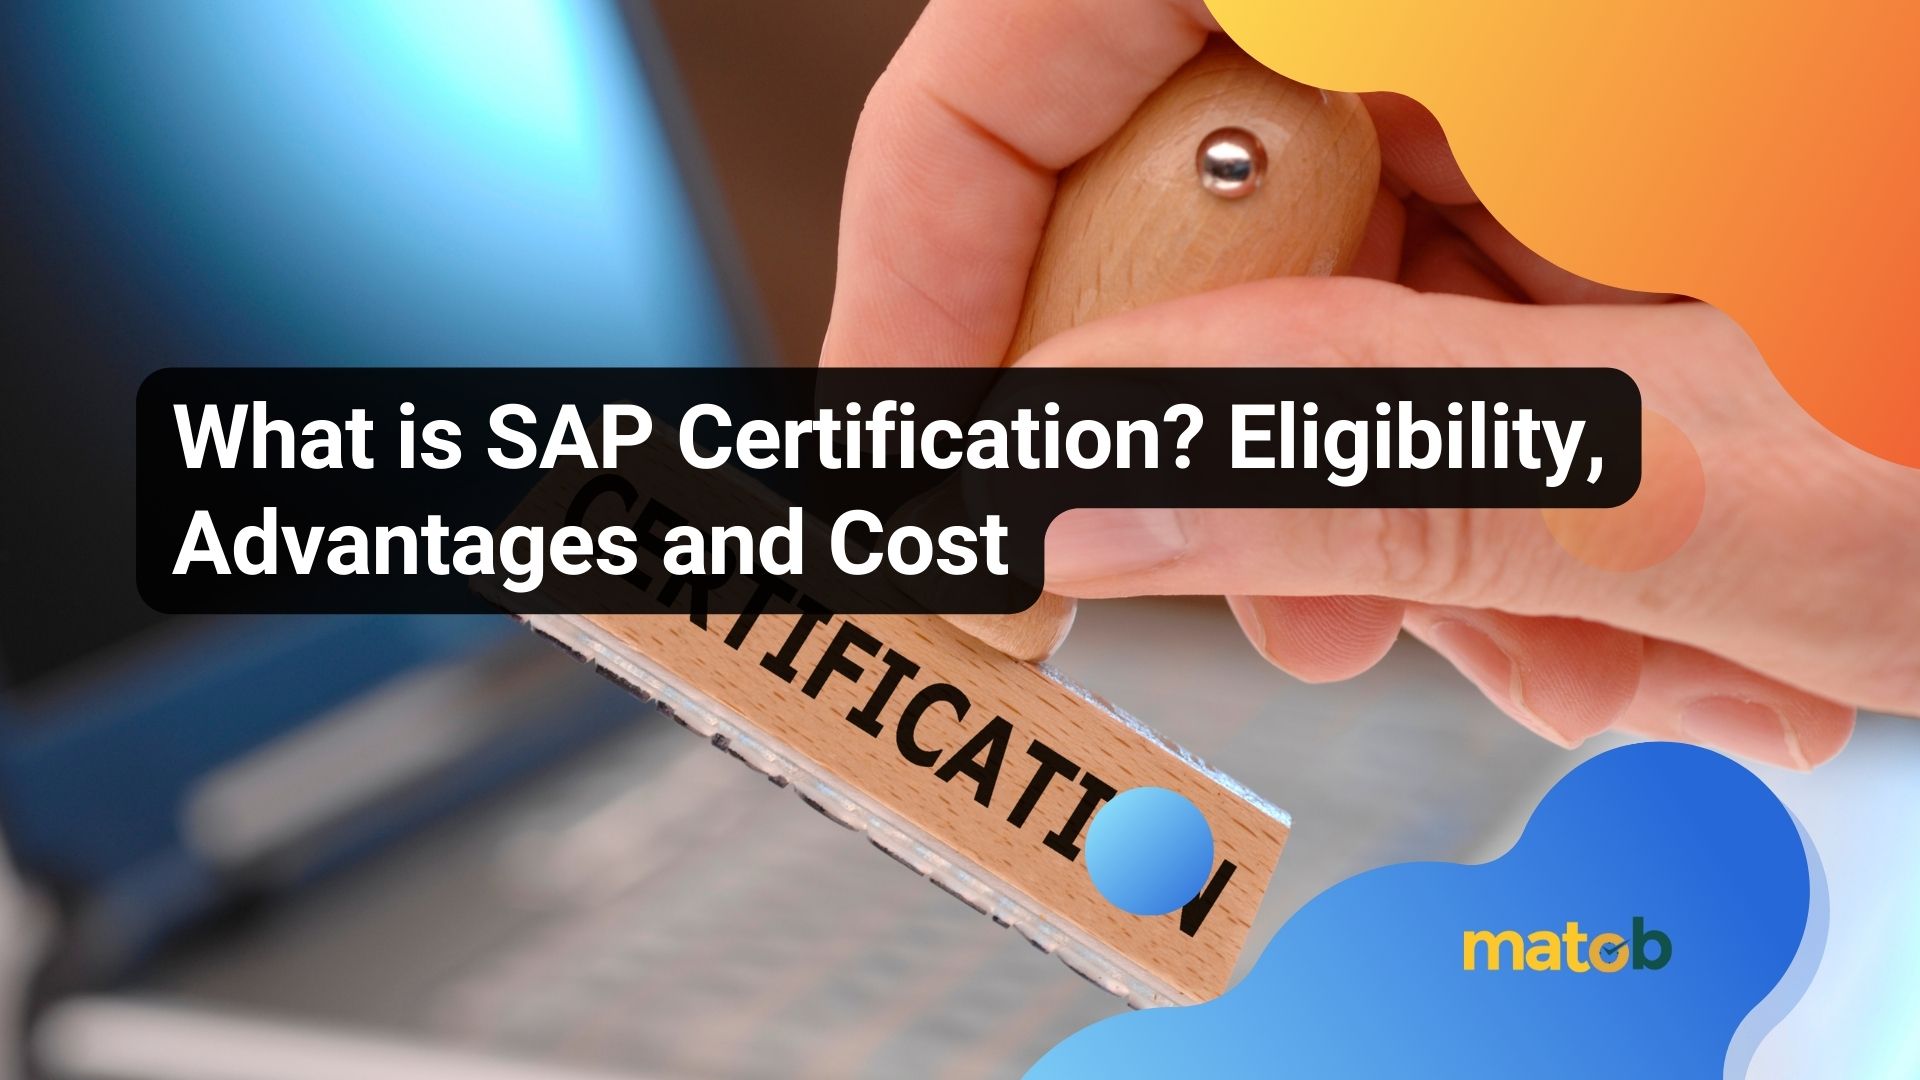 What is SAP Certification? Eligibility, Advantages and Cost